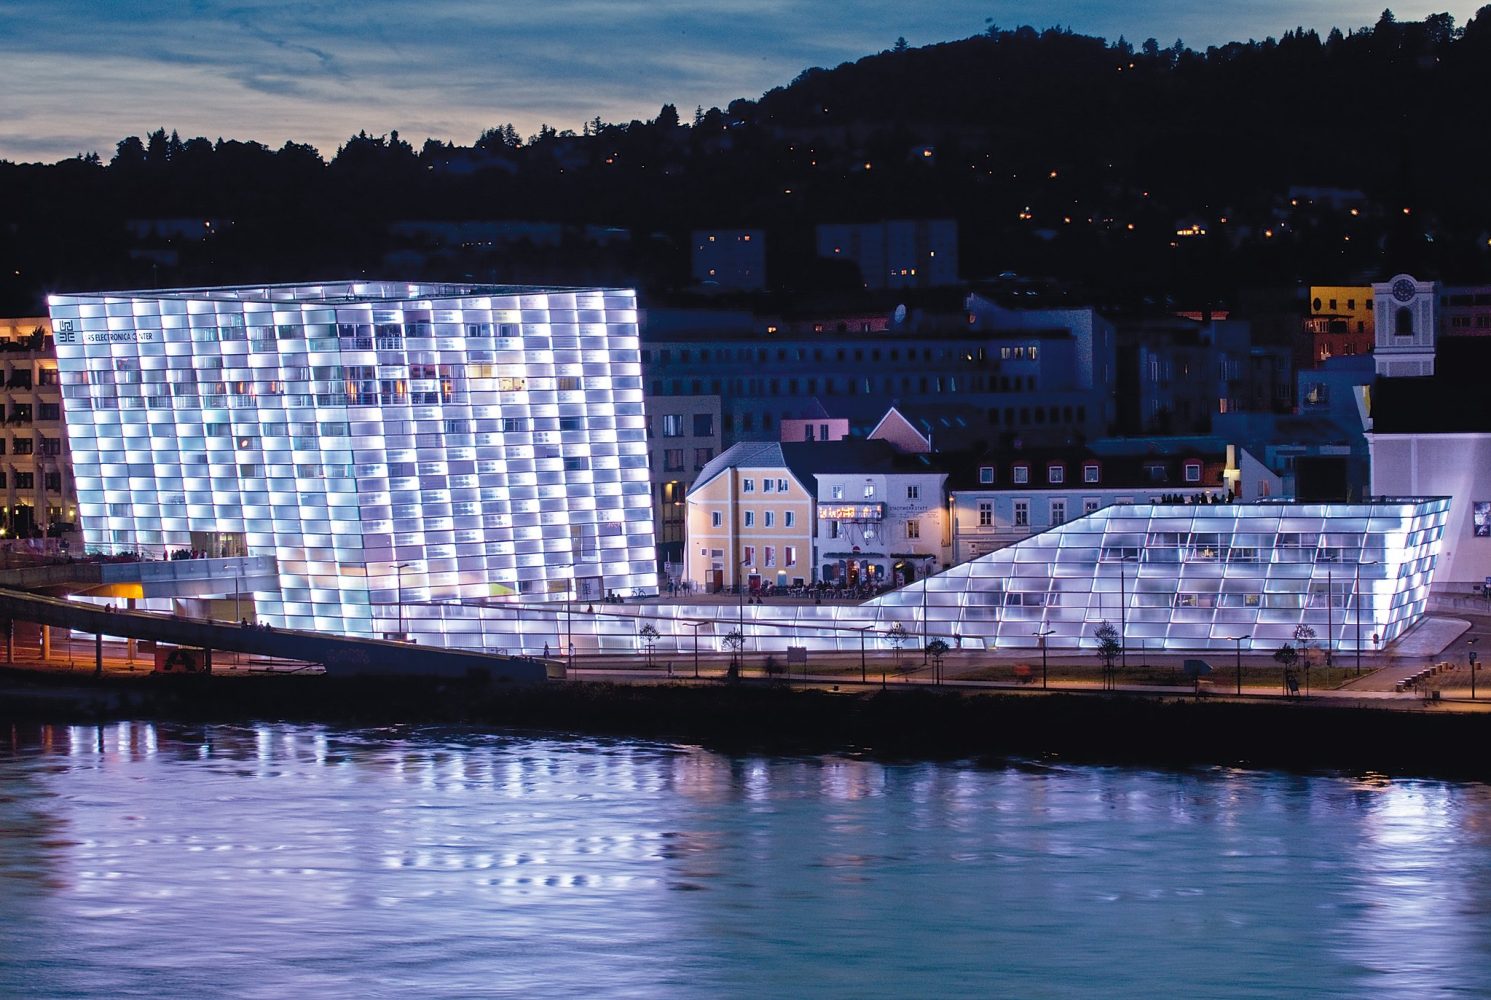 The Ars Electronica Center at night